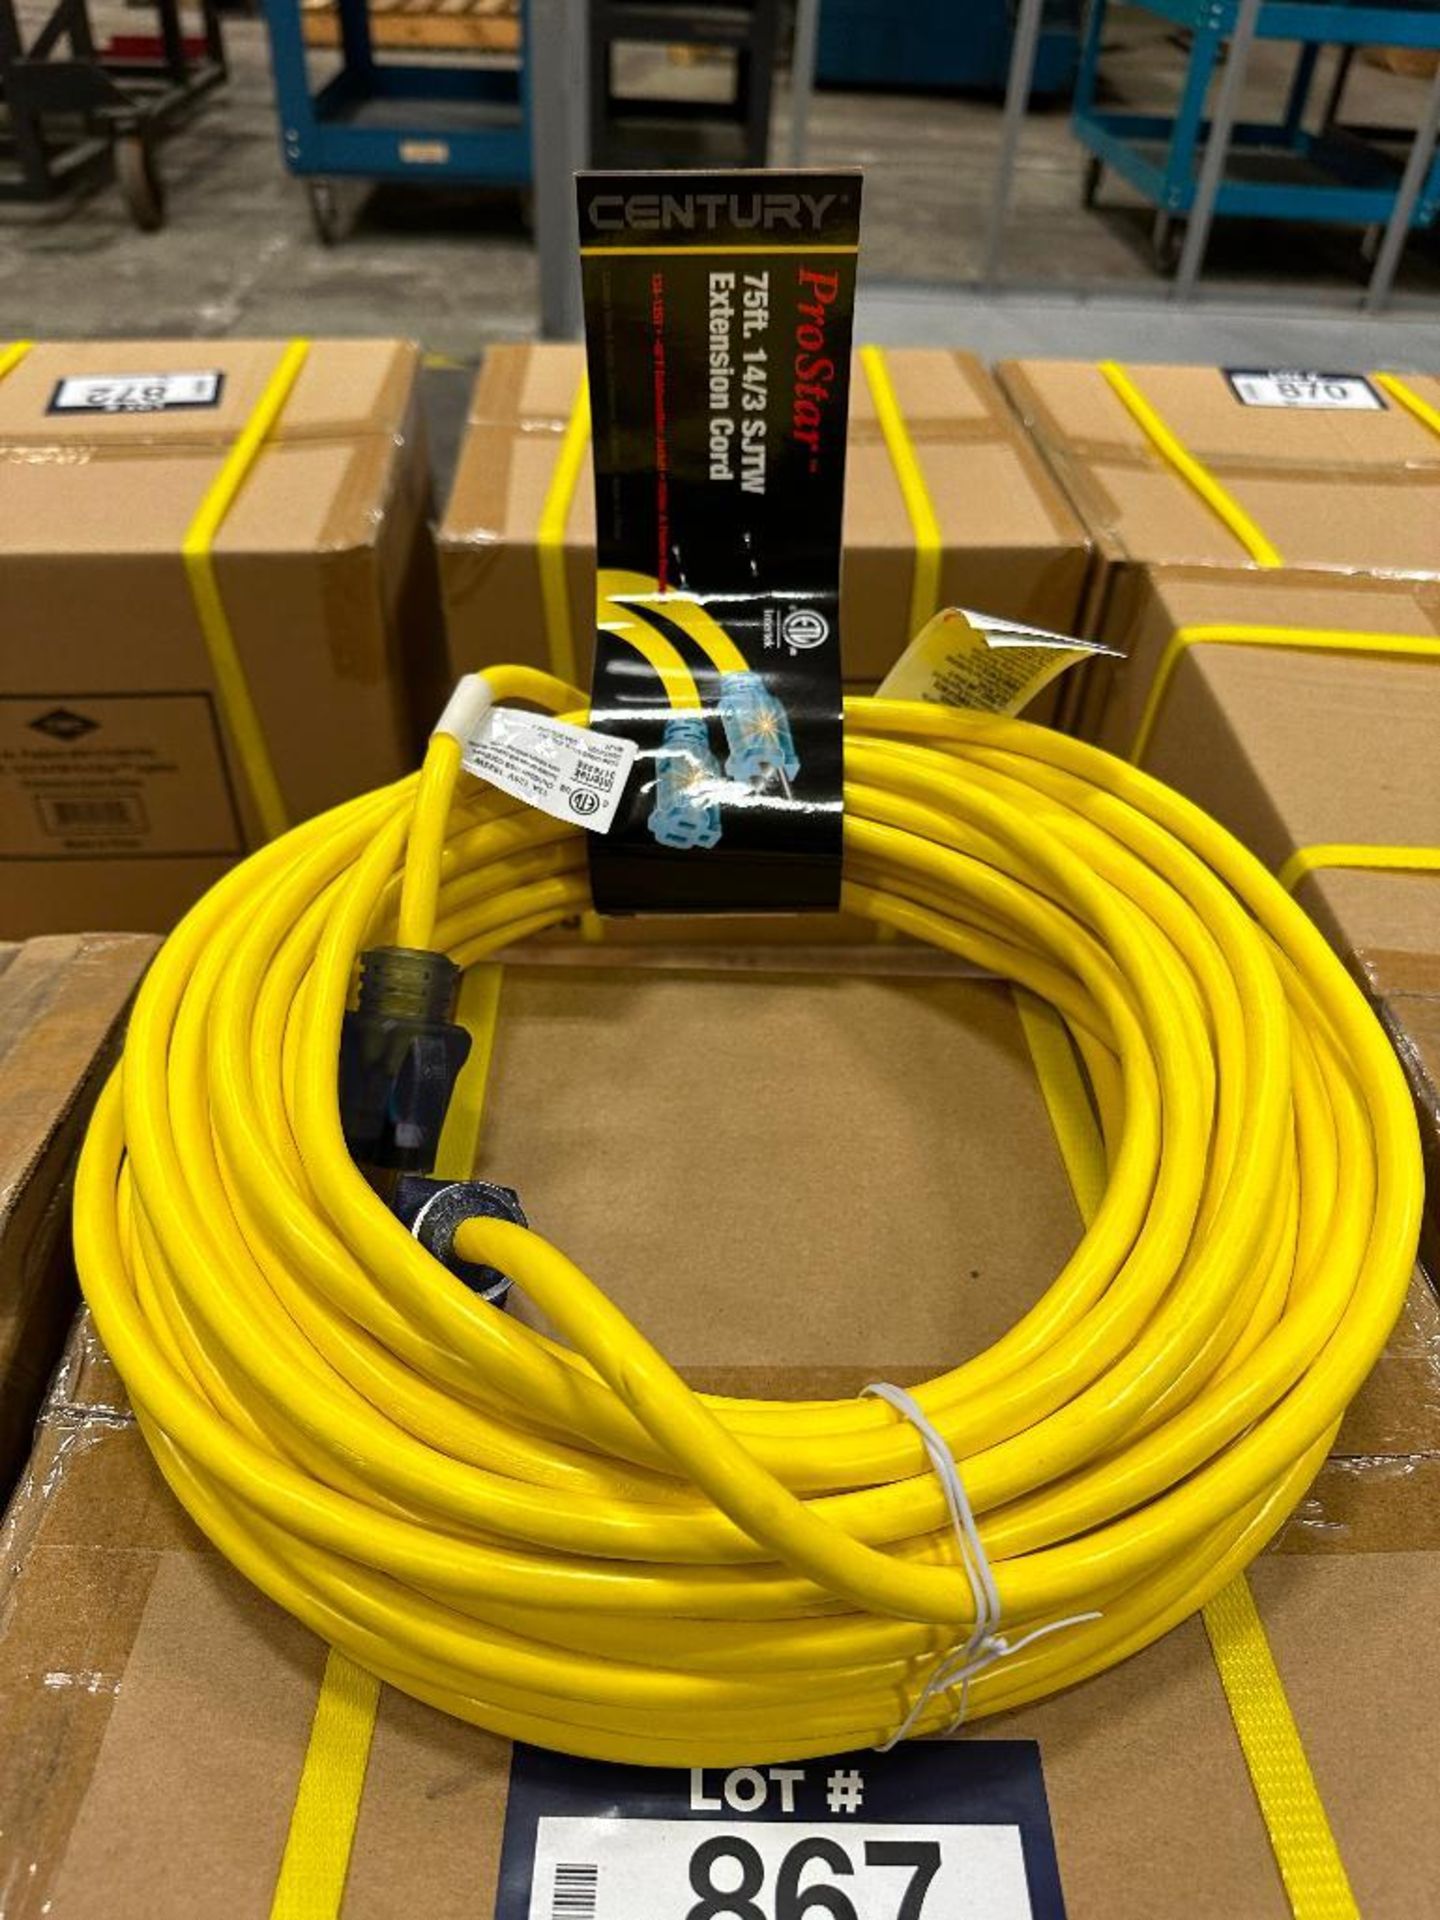 Box of (4) 75' 14/3 Pro Star Lighted Extension Cords - Image 2 of 3